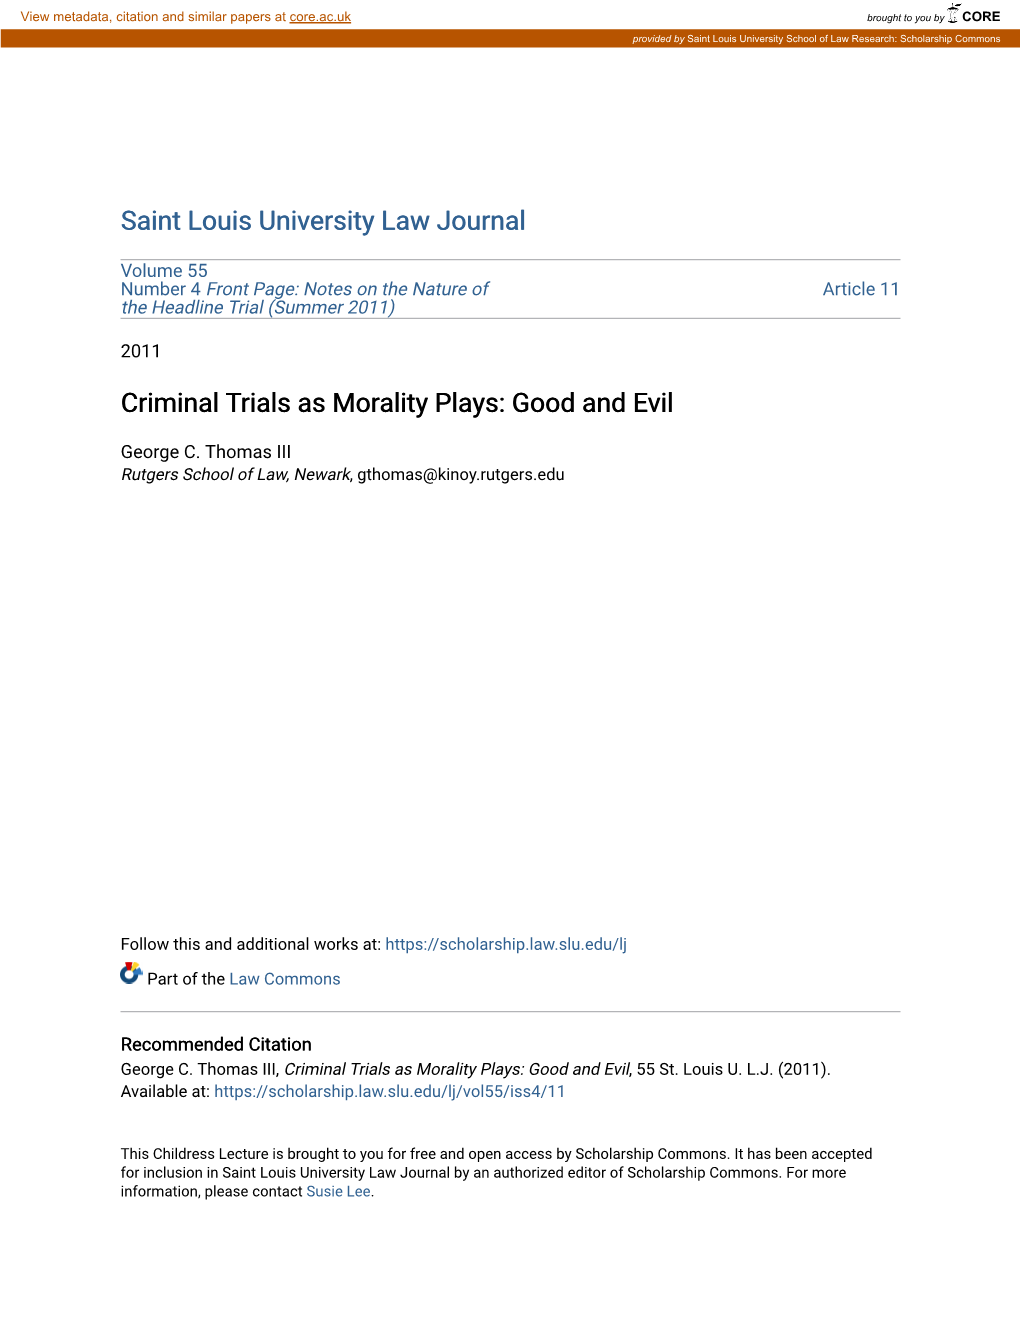 Criminal Trials As Morality Plays: Good and Evil